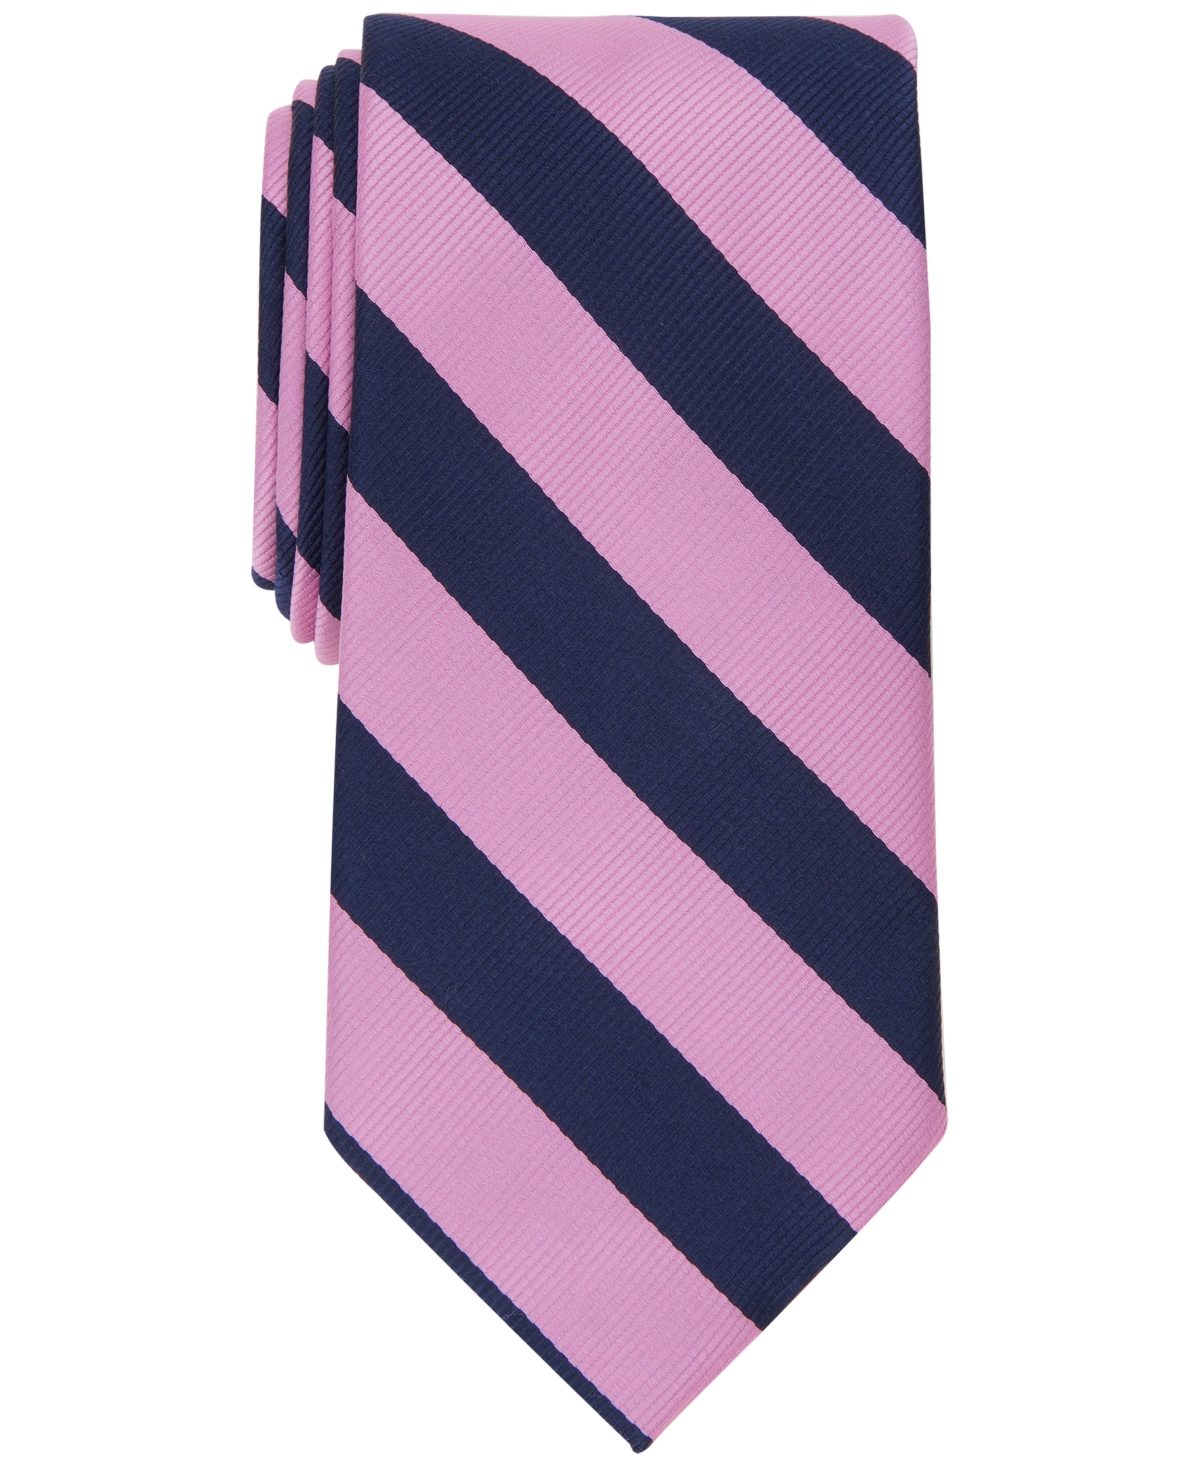 Men's Classic Stripe Tie, Created for Macy's - Taupe